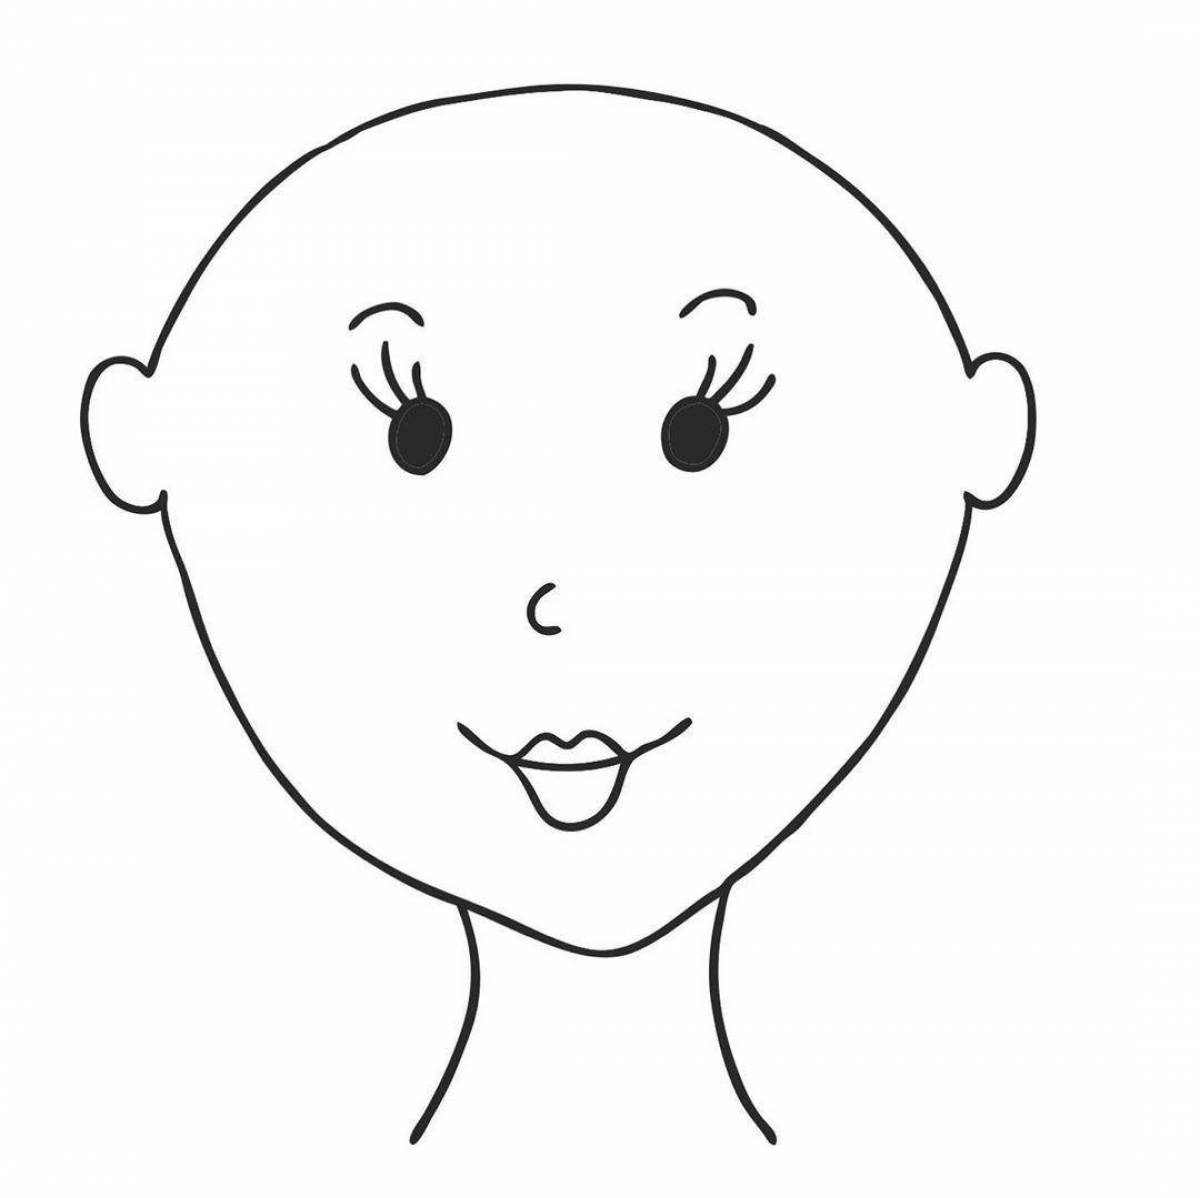 Human face for kids #22